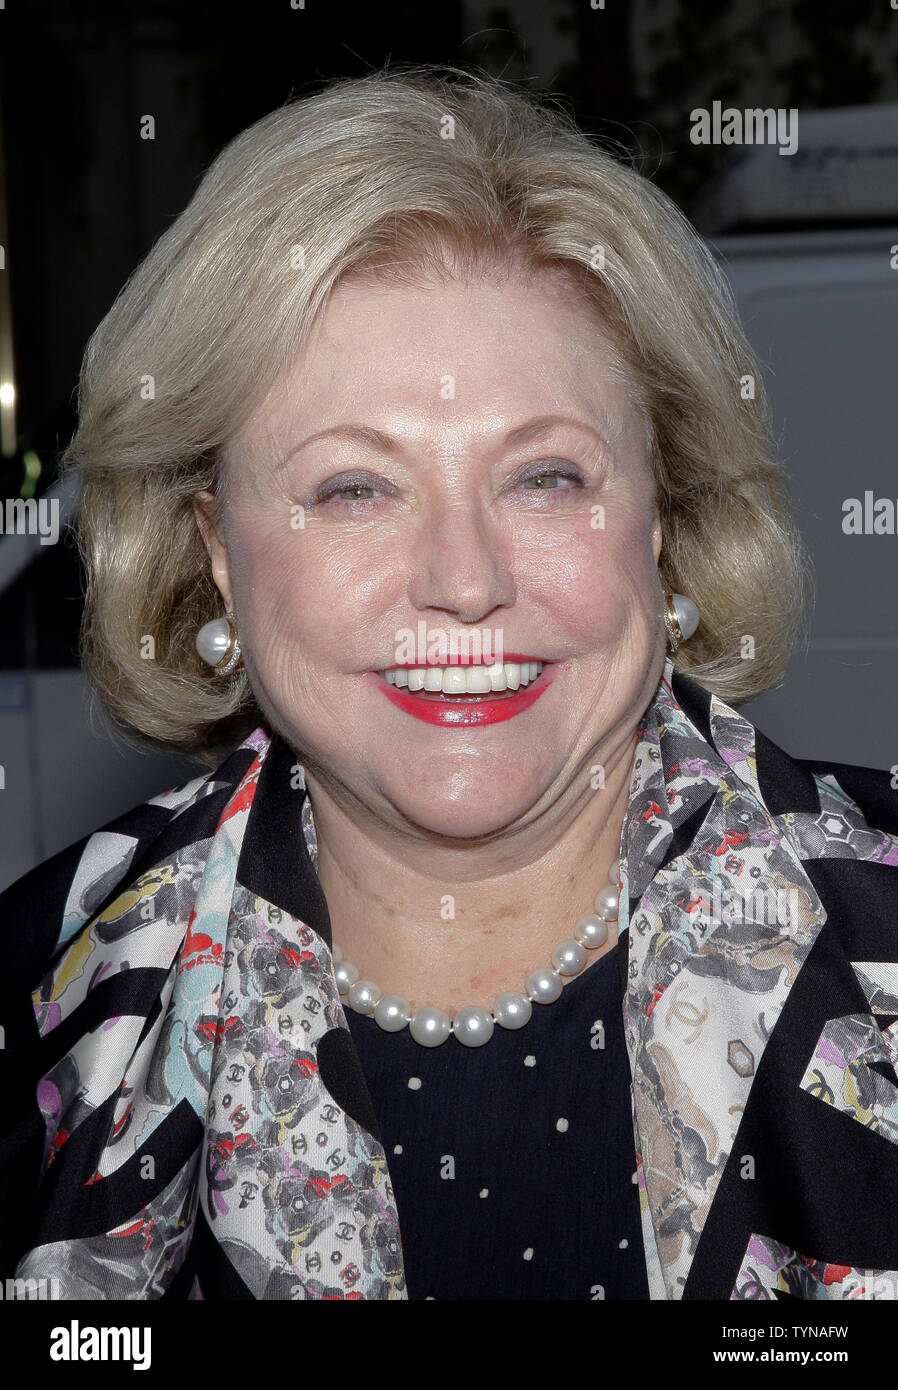 Barbara Taylor Bradford arrives at Cosmopolitan's  'The Cosmo 100'  featuring New York City's 100 Most Powerful Women at Michael's Restaurant in New York City on November 12, 2012.       UPI/John Angelillo Stock Photo